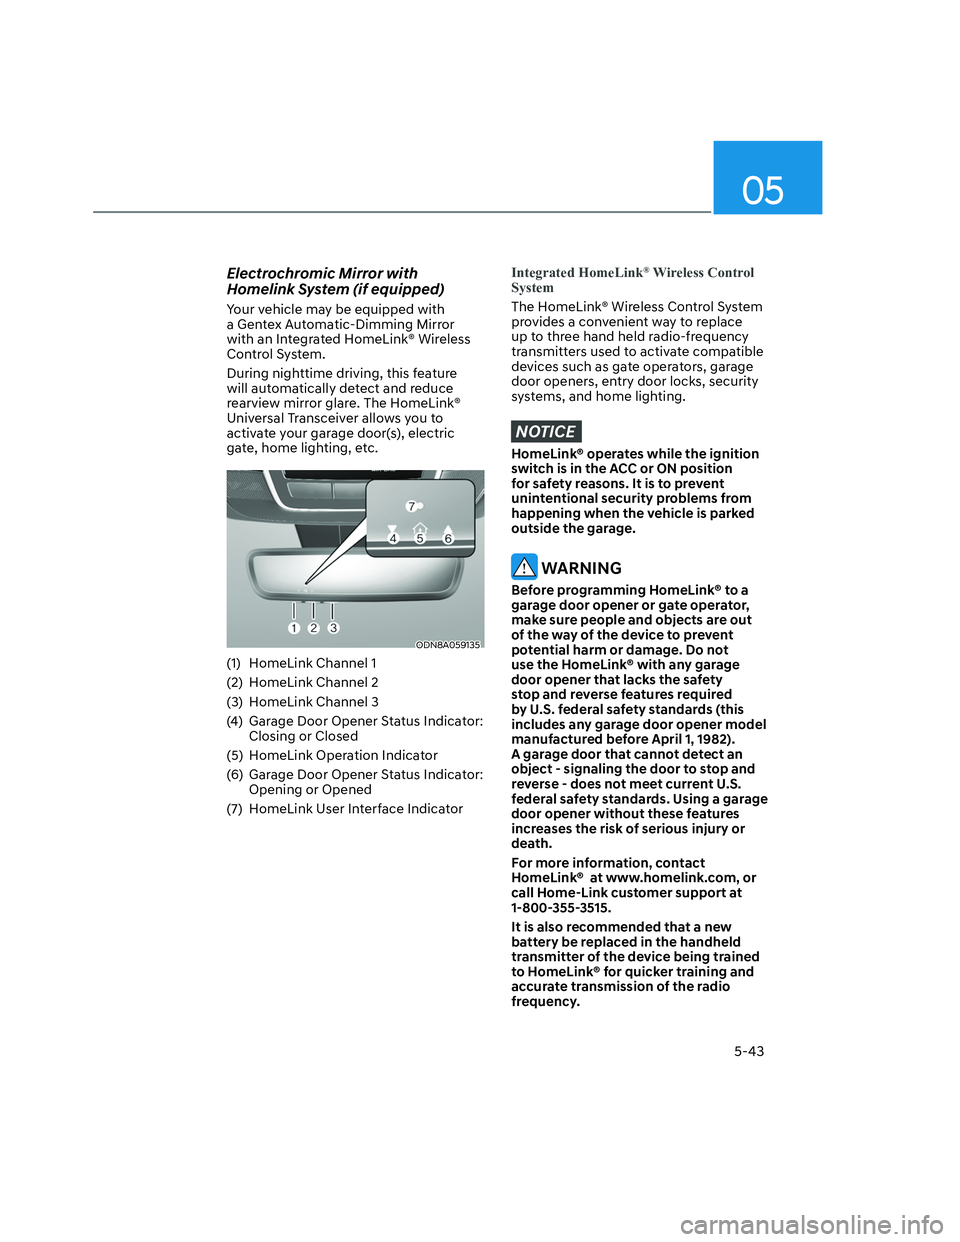 HYUNDAI SANTA CRUZ 2022  Owners Manual 05
5-43
Electrochromic Mirror with 
Homelink System (if equipped)
Your vehicle may be equipped with 
a Gentex Automatic-Dimming Mirror 
with an Integrated HomeLink® Wireless 
Control System.
During n